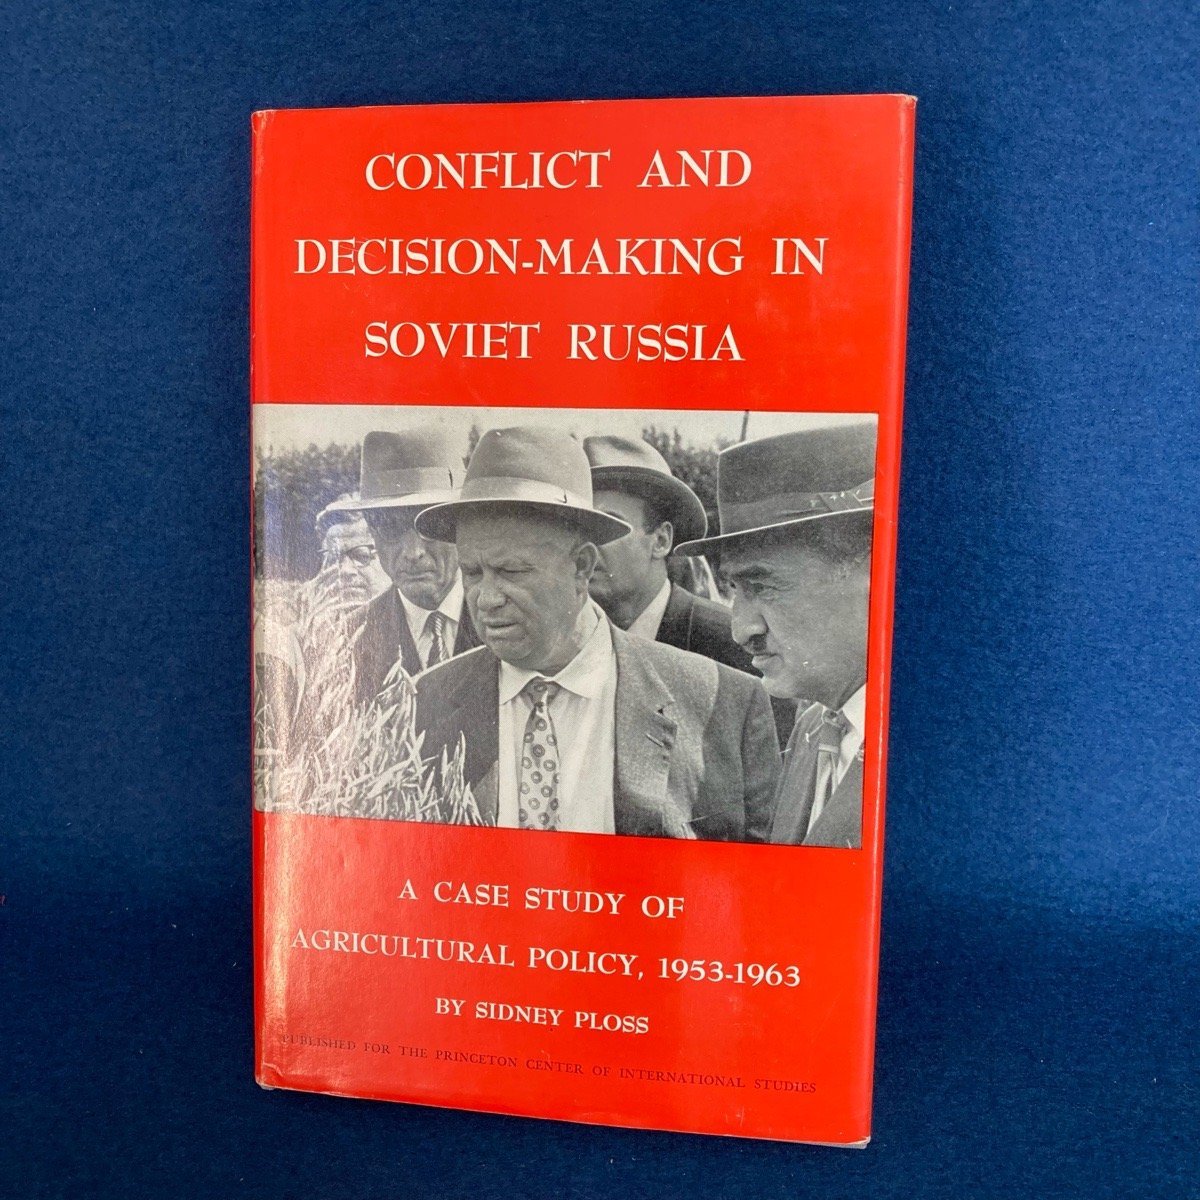 CONFLICT AND DECISION-MAKING IN SOVIET RUSSIA A CASE STUDY OF AGRICULTURAL POLICY, SIDNEY PLOSS 洋書 古本 digjunkmarket_6-711